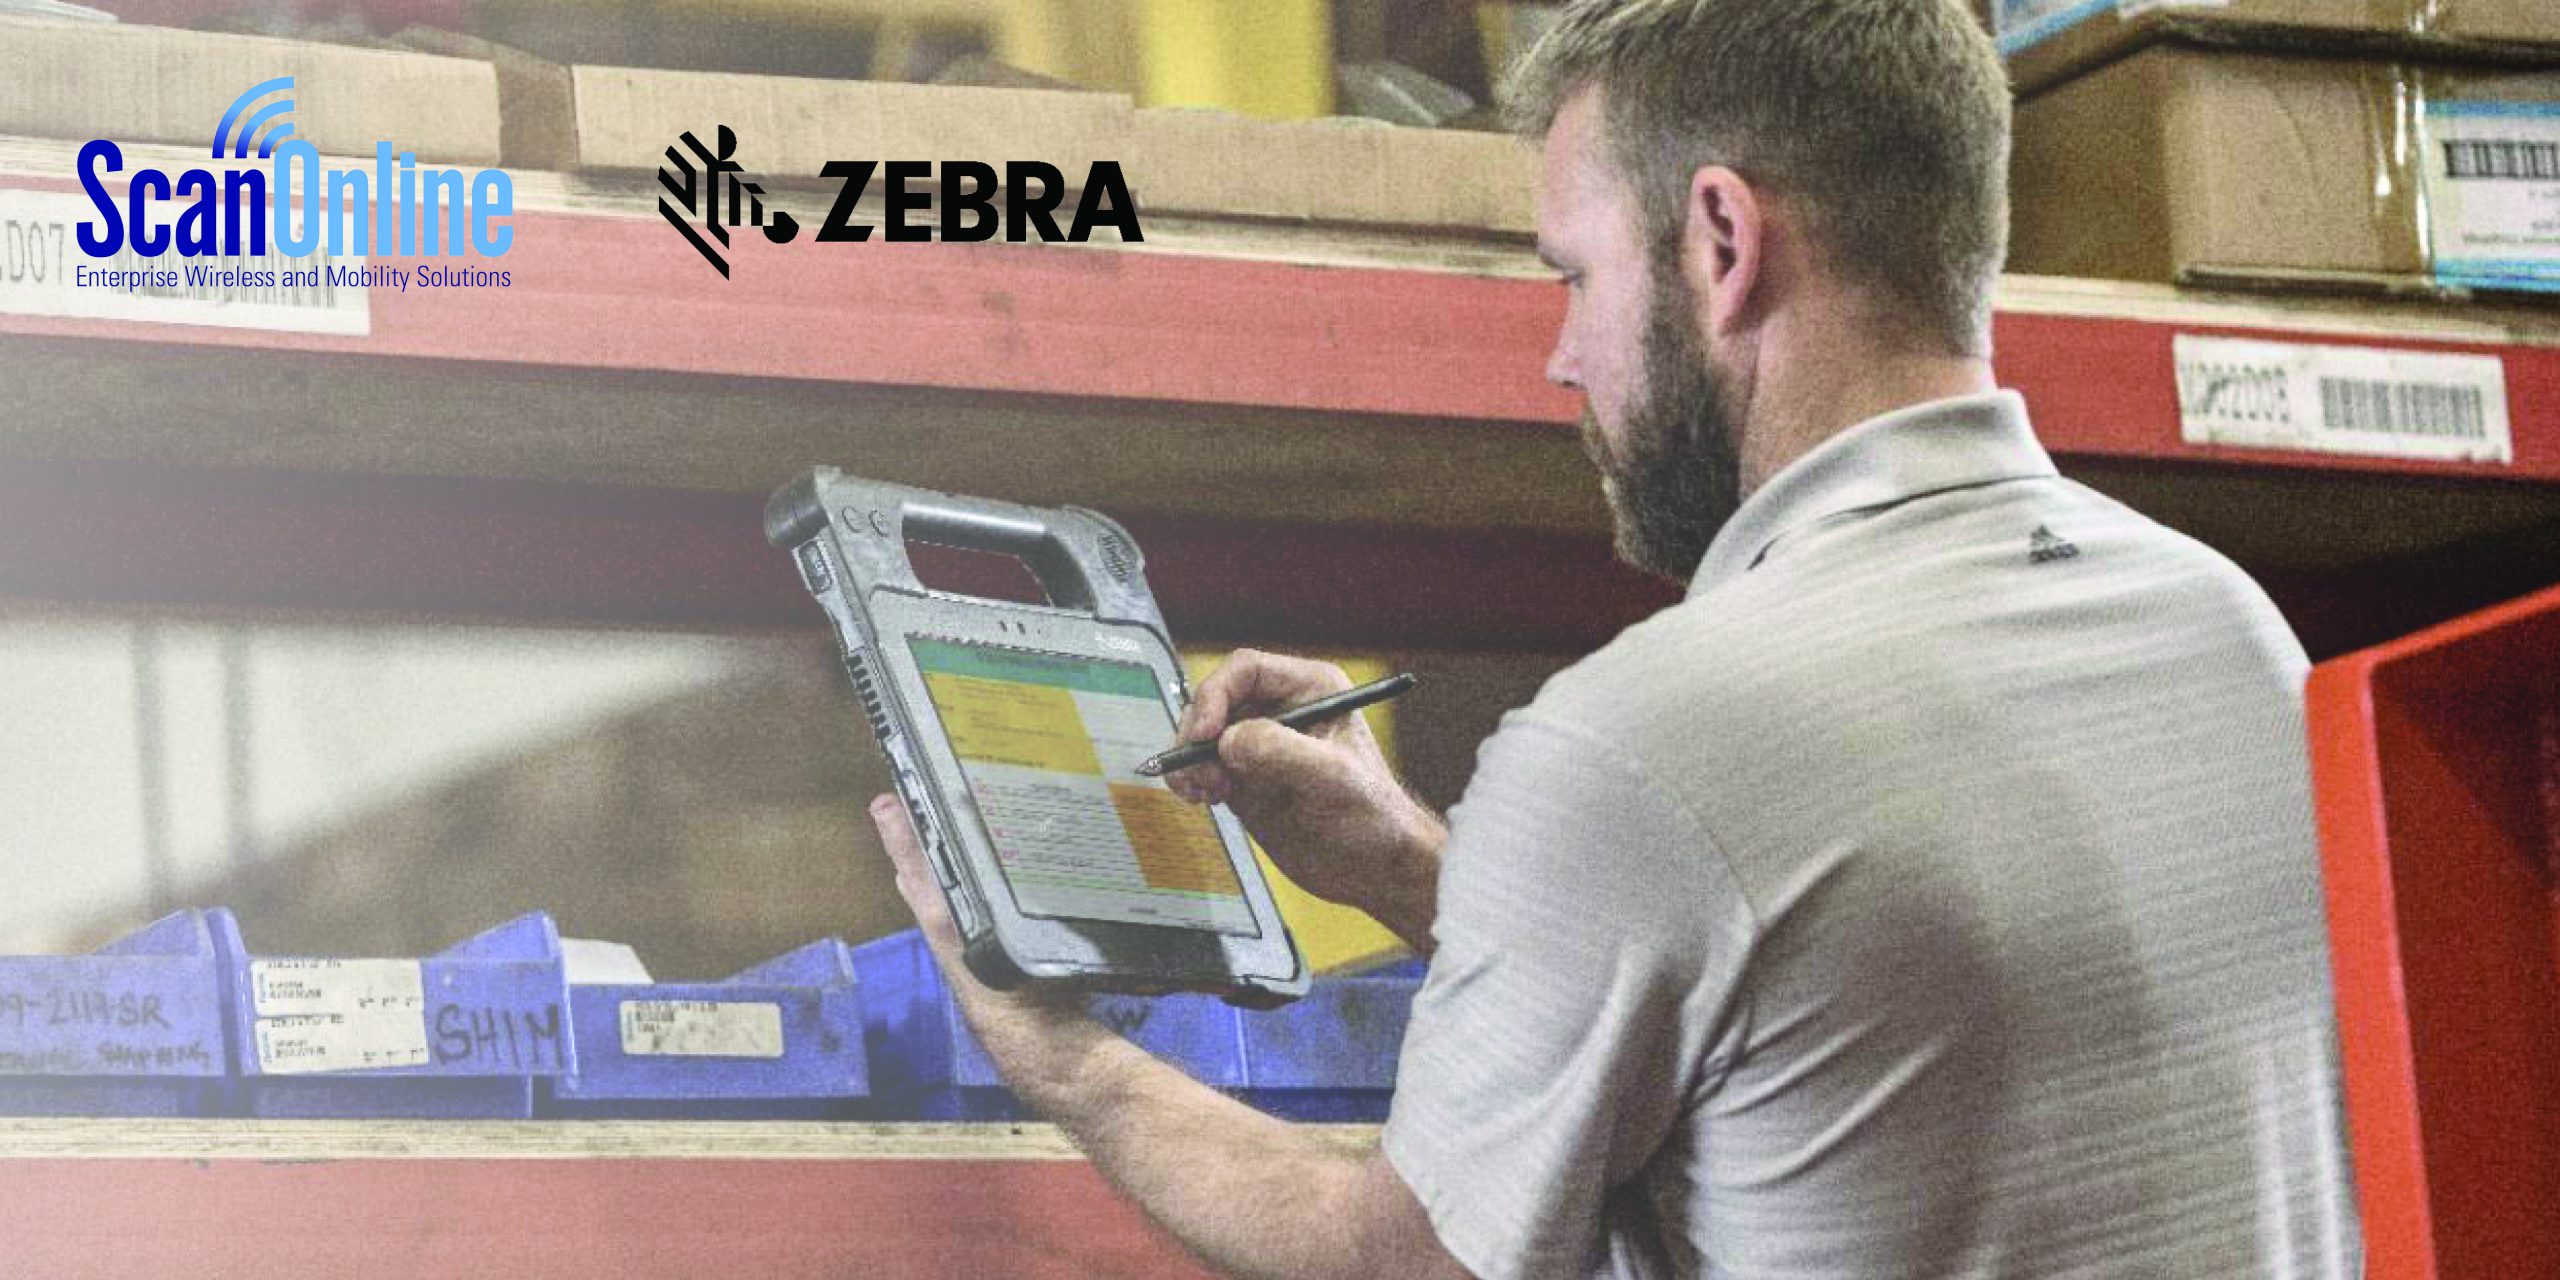 If you're dealing with any of these supply chain issues, you need a Rugged Tablet